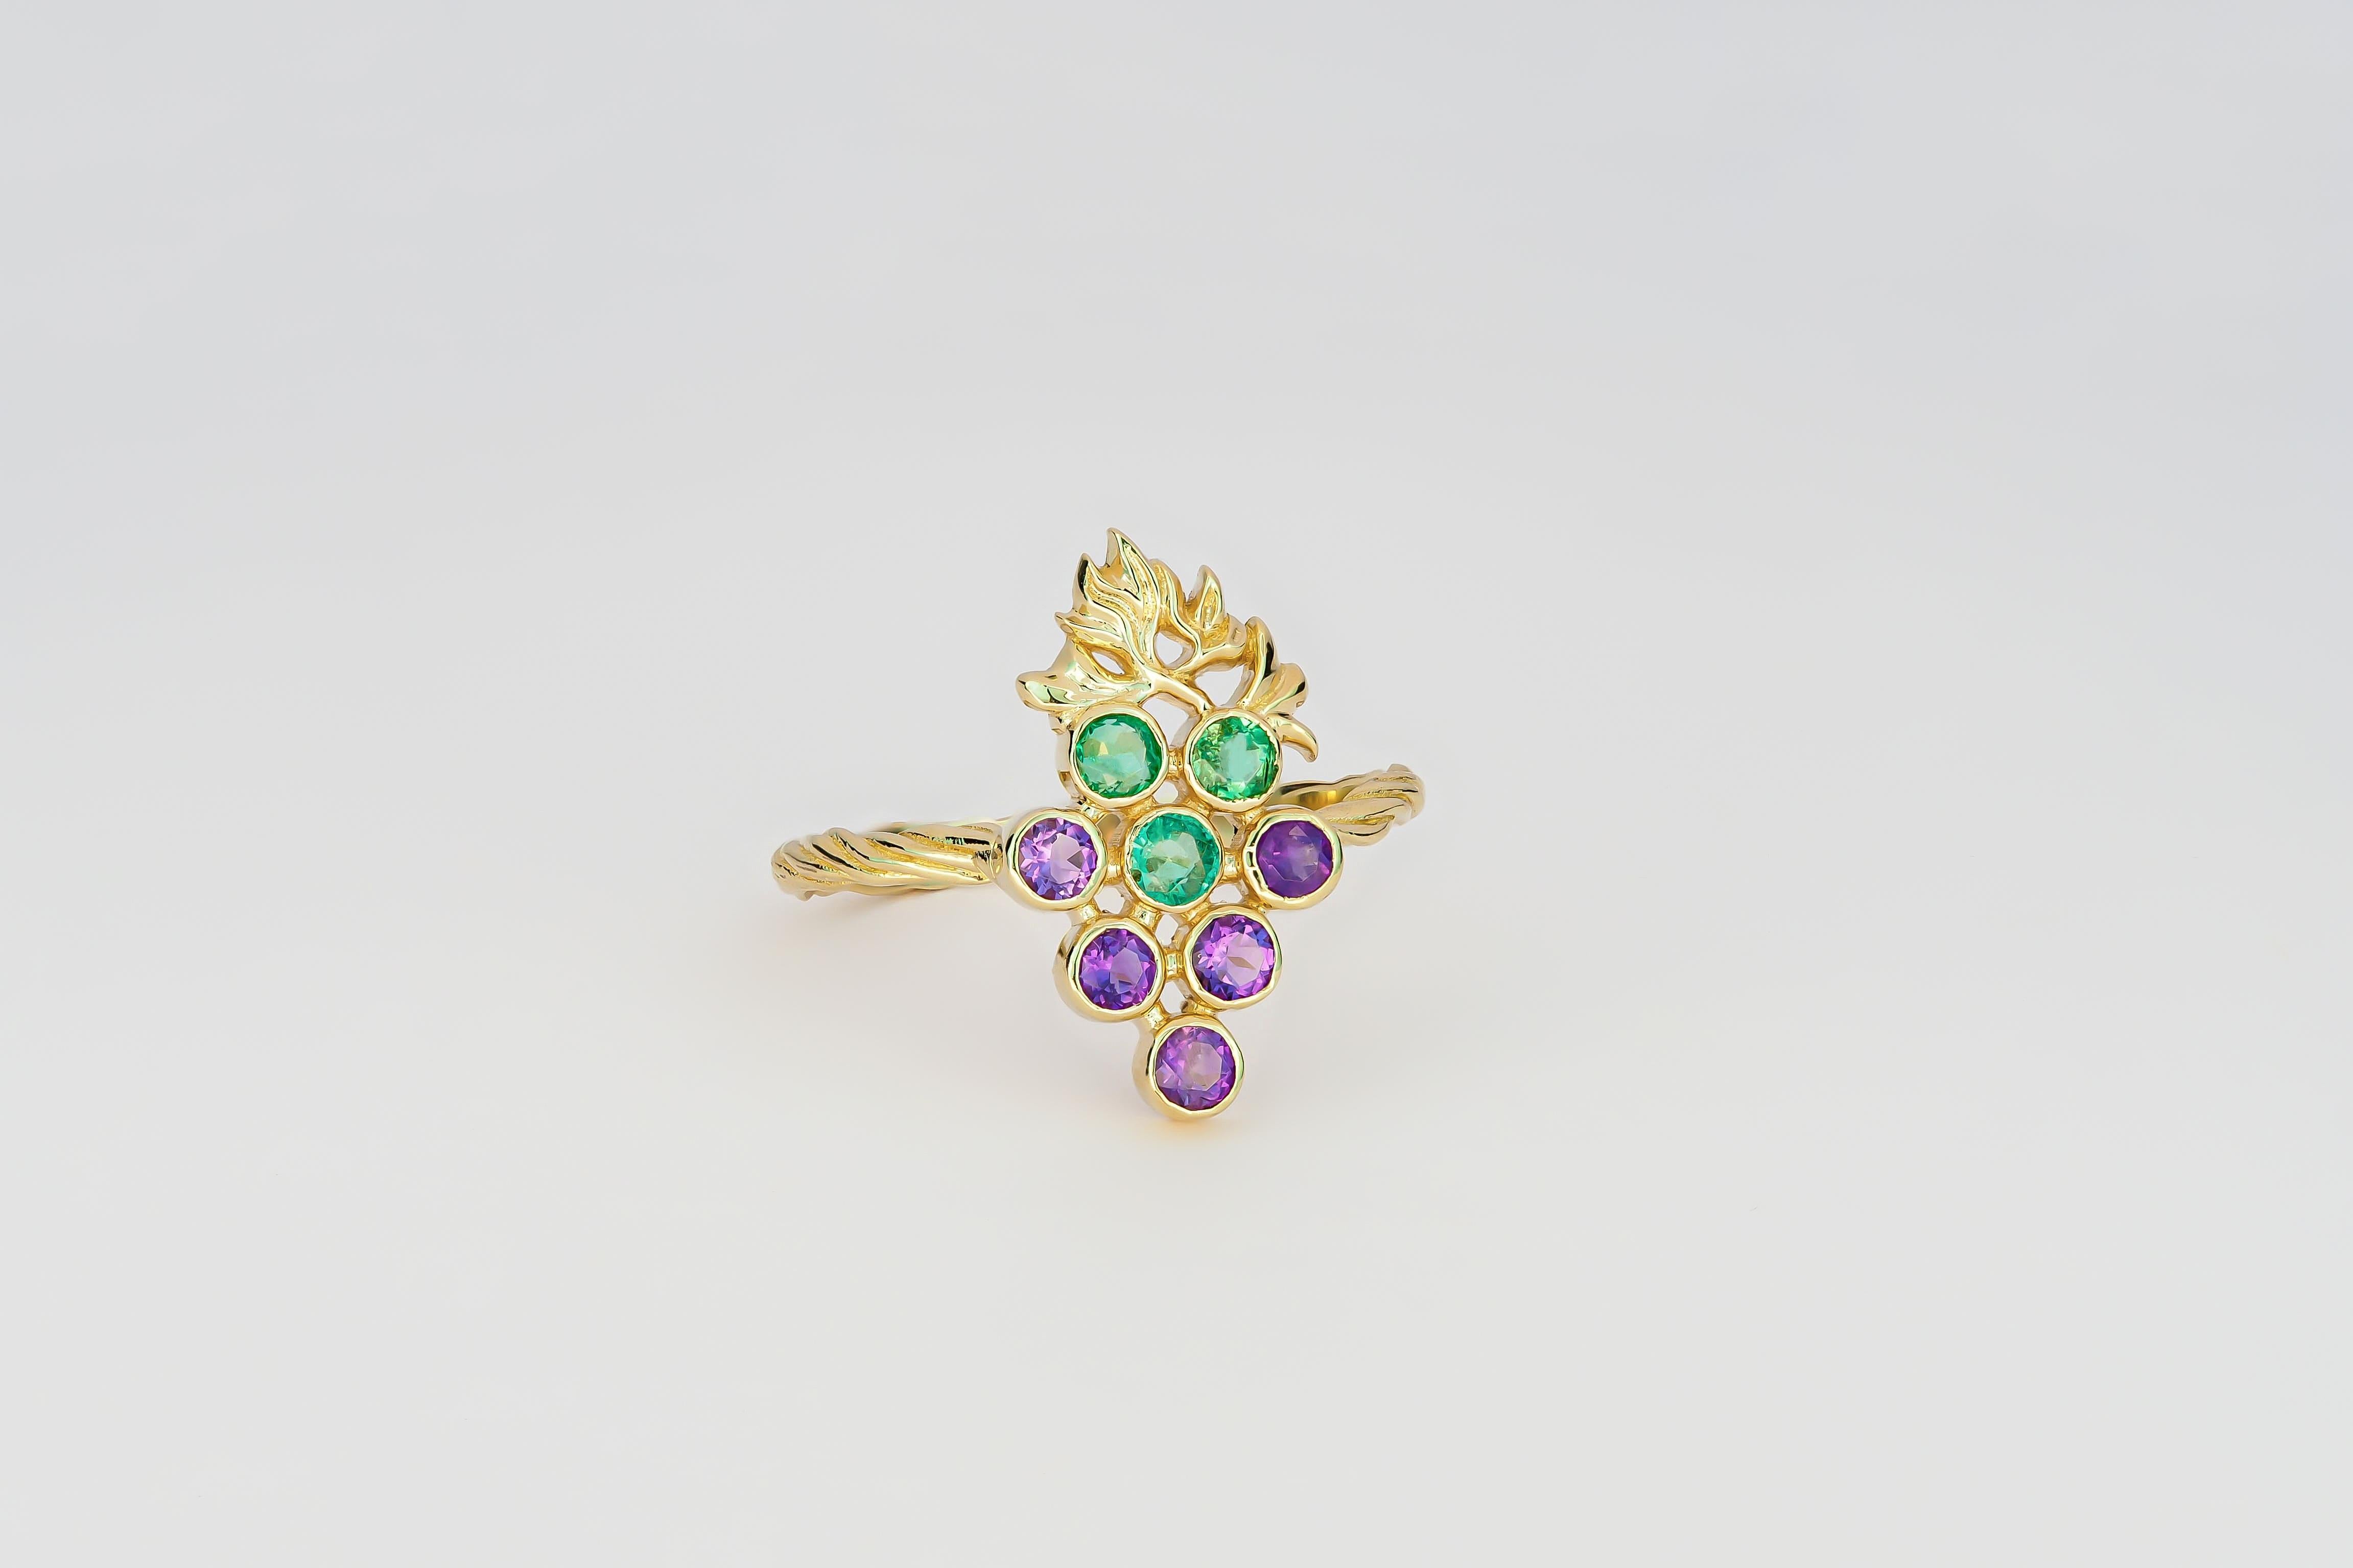 14k gold ring with natural emeralds and amethysts. 
May birthstone. February birthstone.
Metal: 14kt solid gold
Weight approx. 1.95 g.

Gemstones:
Natural emeralds: 3 pieces, weight - 0.33 ct approx (3 pieces x 0.11 ct)
Color - green, round cut,